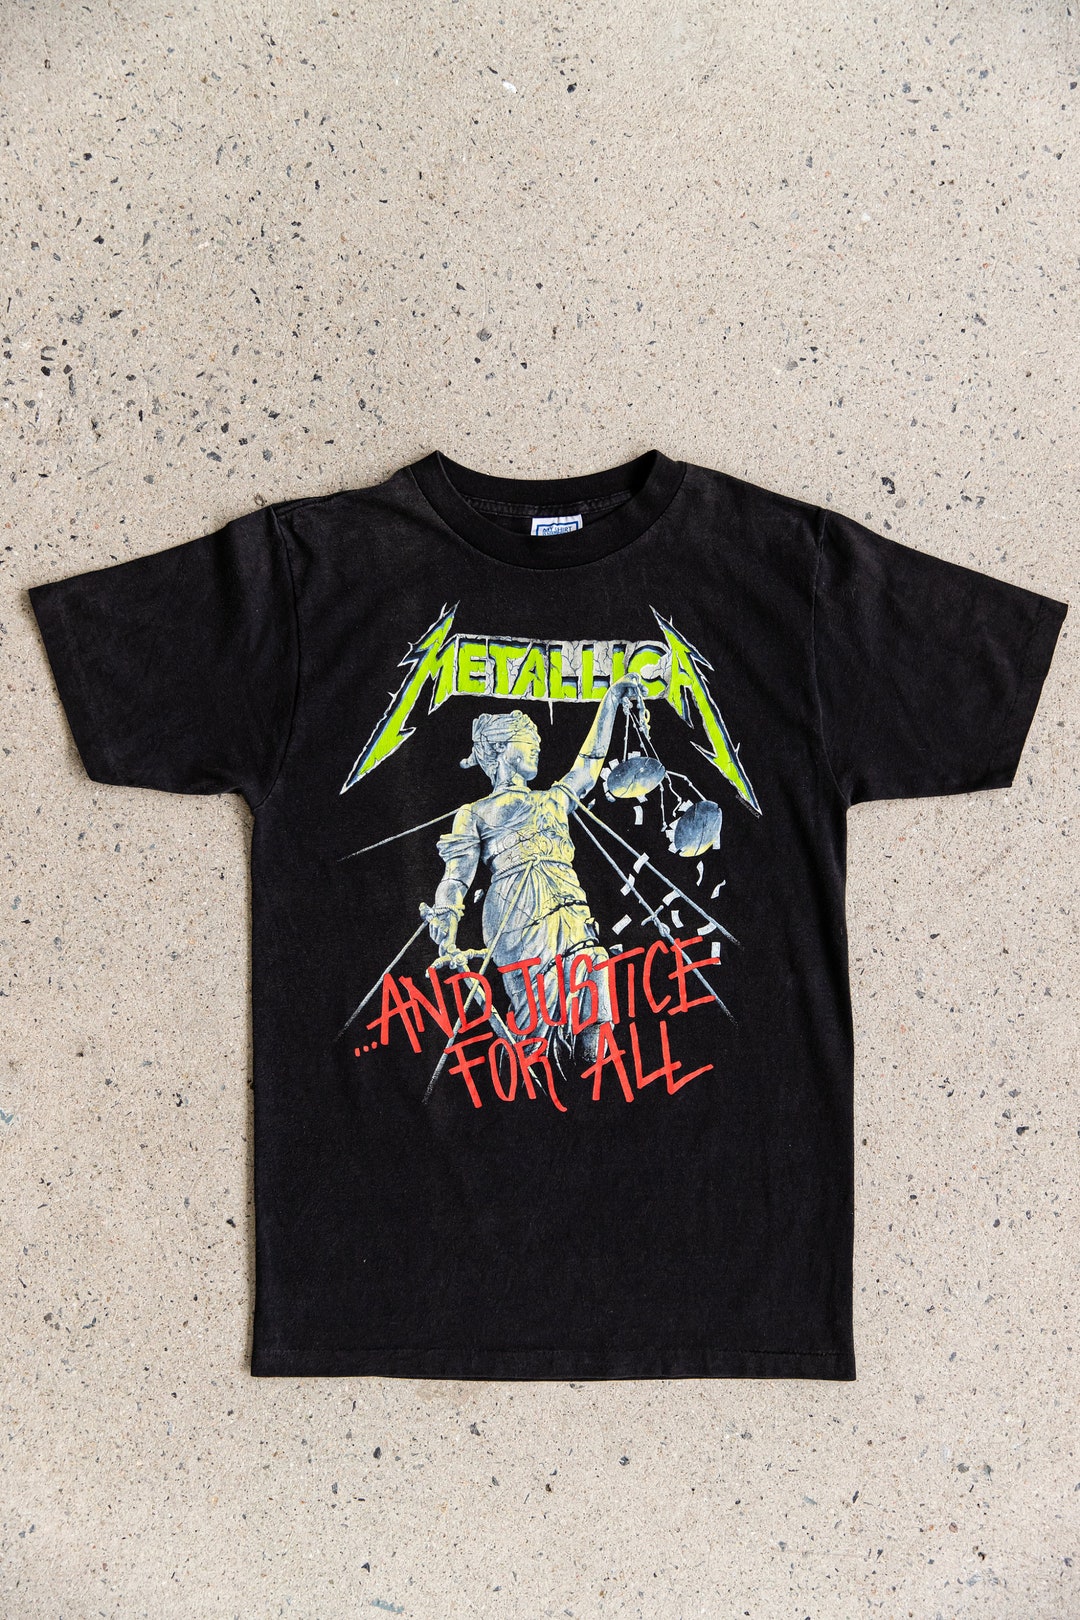 Metallica And Justice For All 90s Tシャツ